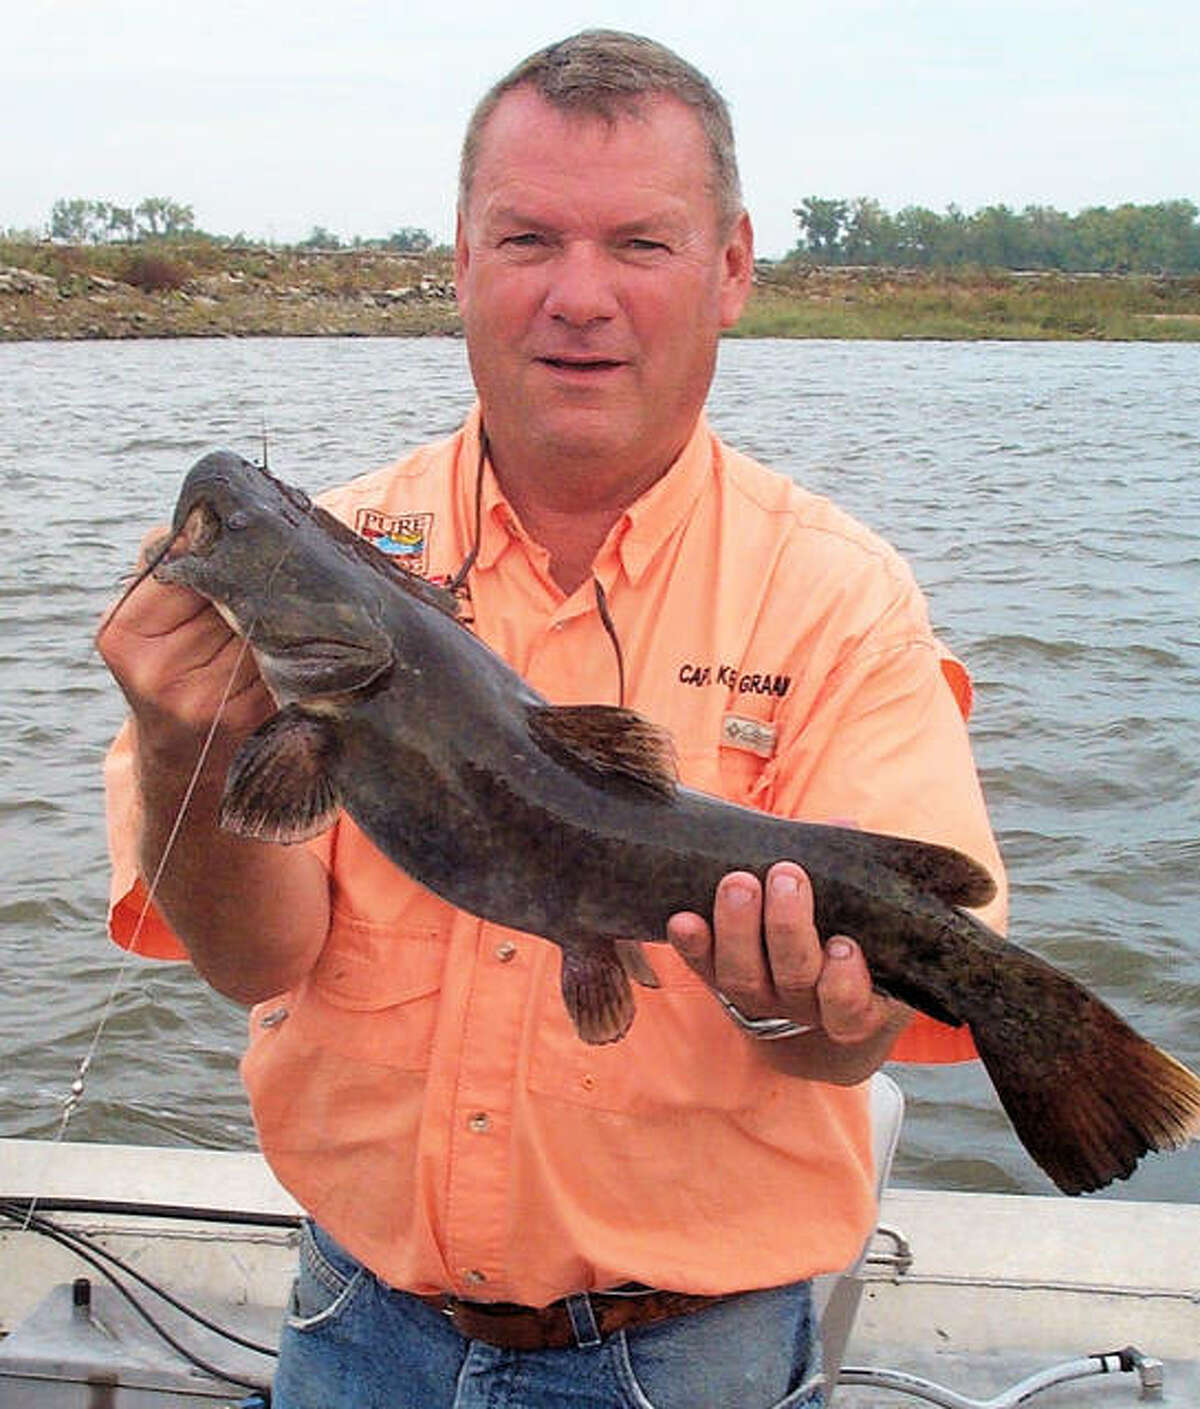 Illinois waters offer excellent angling opportunities for catfish of all sizes.